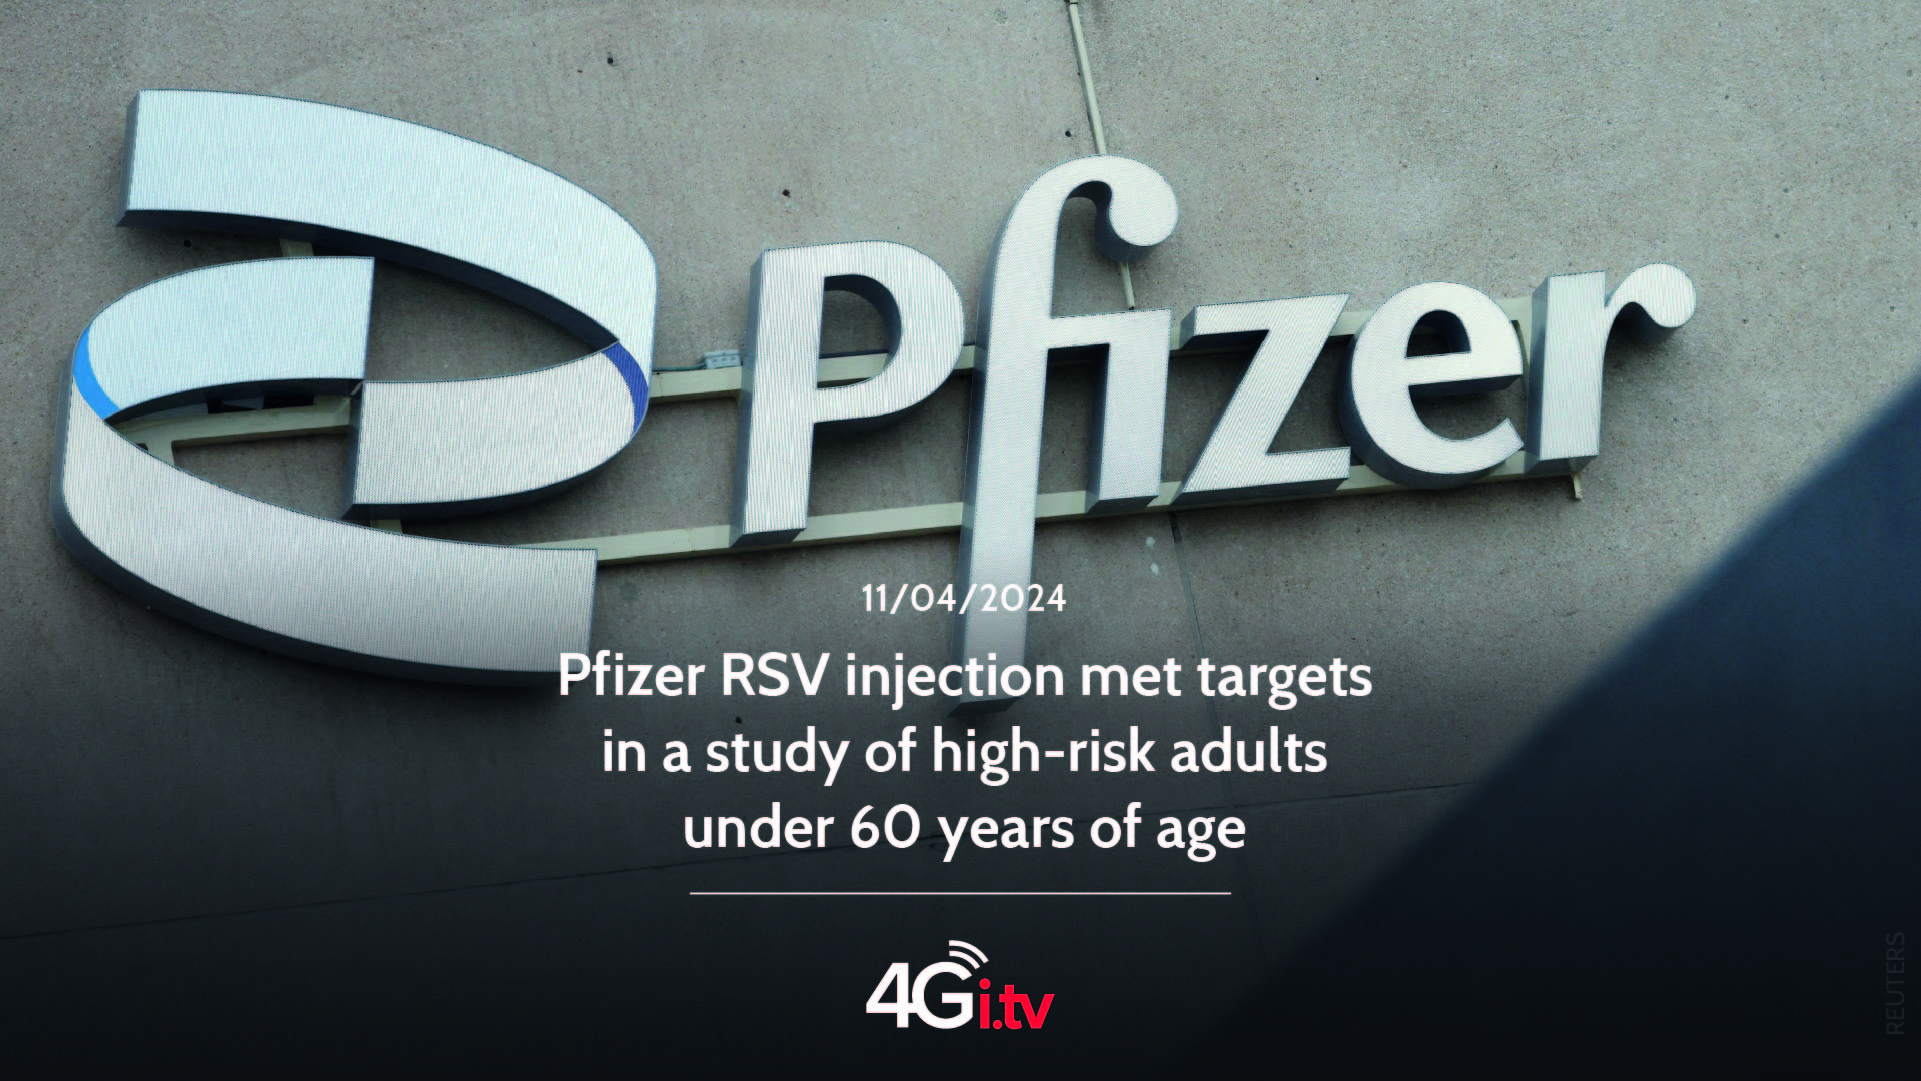 Подробнее о статье Pfizer RSV injection met targets in a study of high-risk adults under 60 years of age 